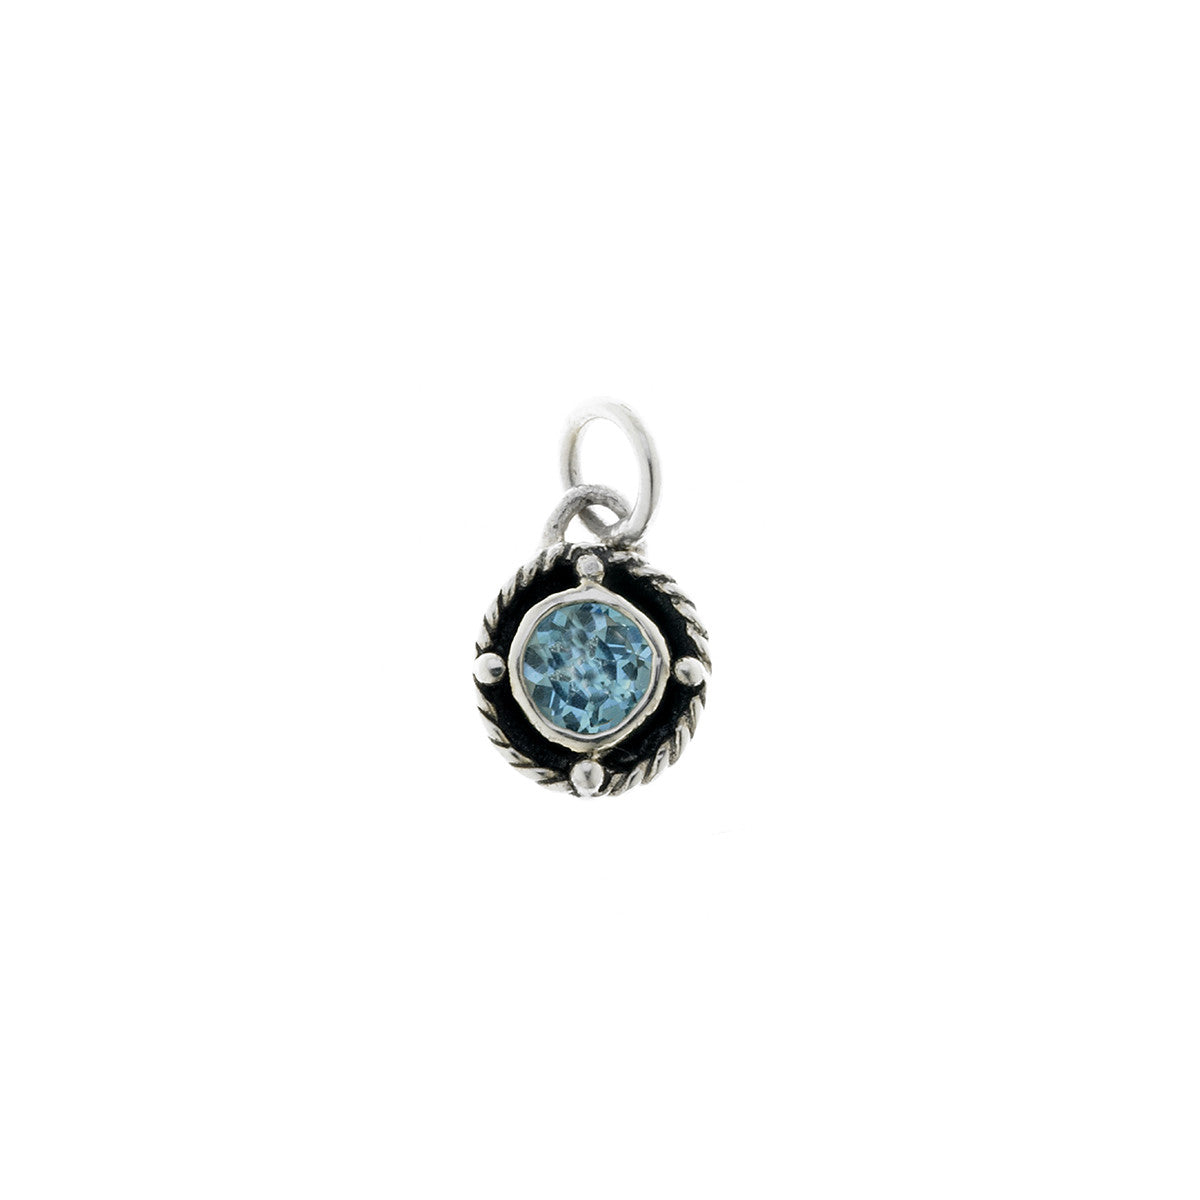 Kamon Sterling Silver And Blue Topaz March Charm - Cynthia Gale New York Jewelry